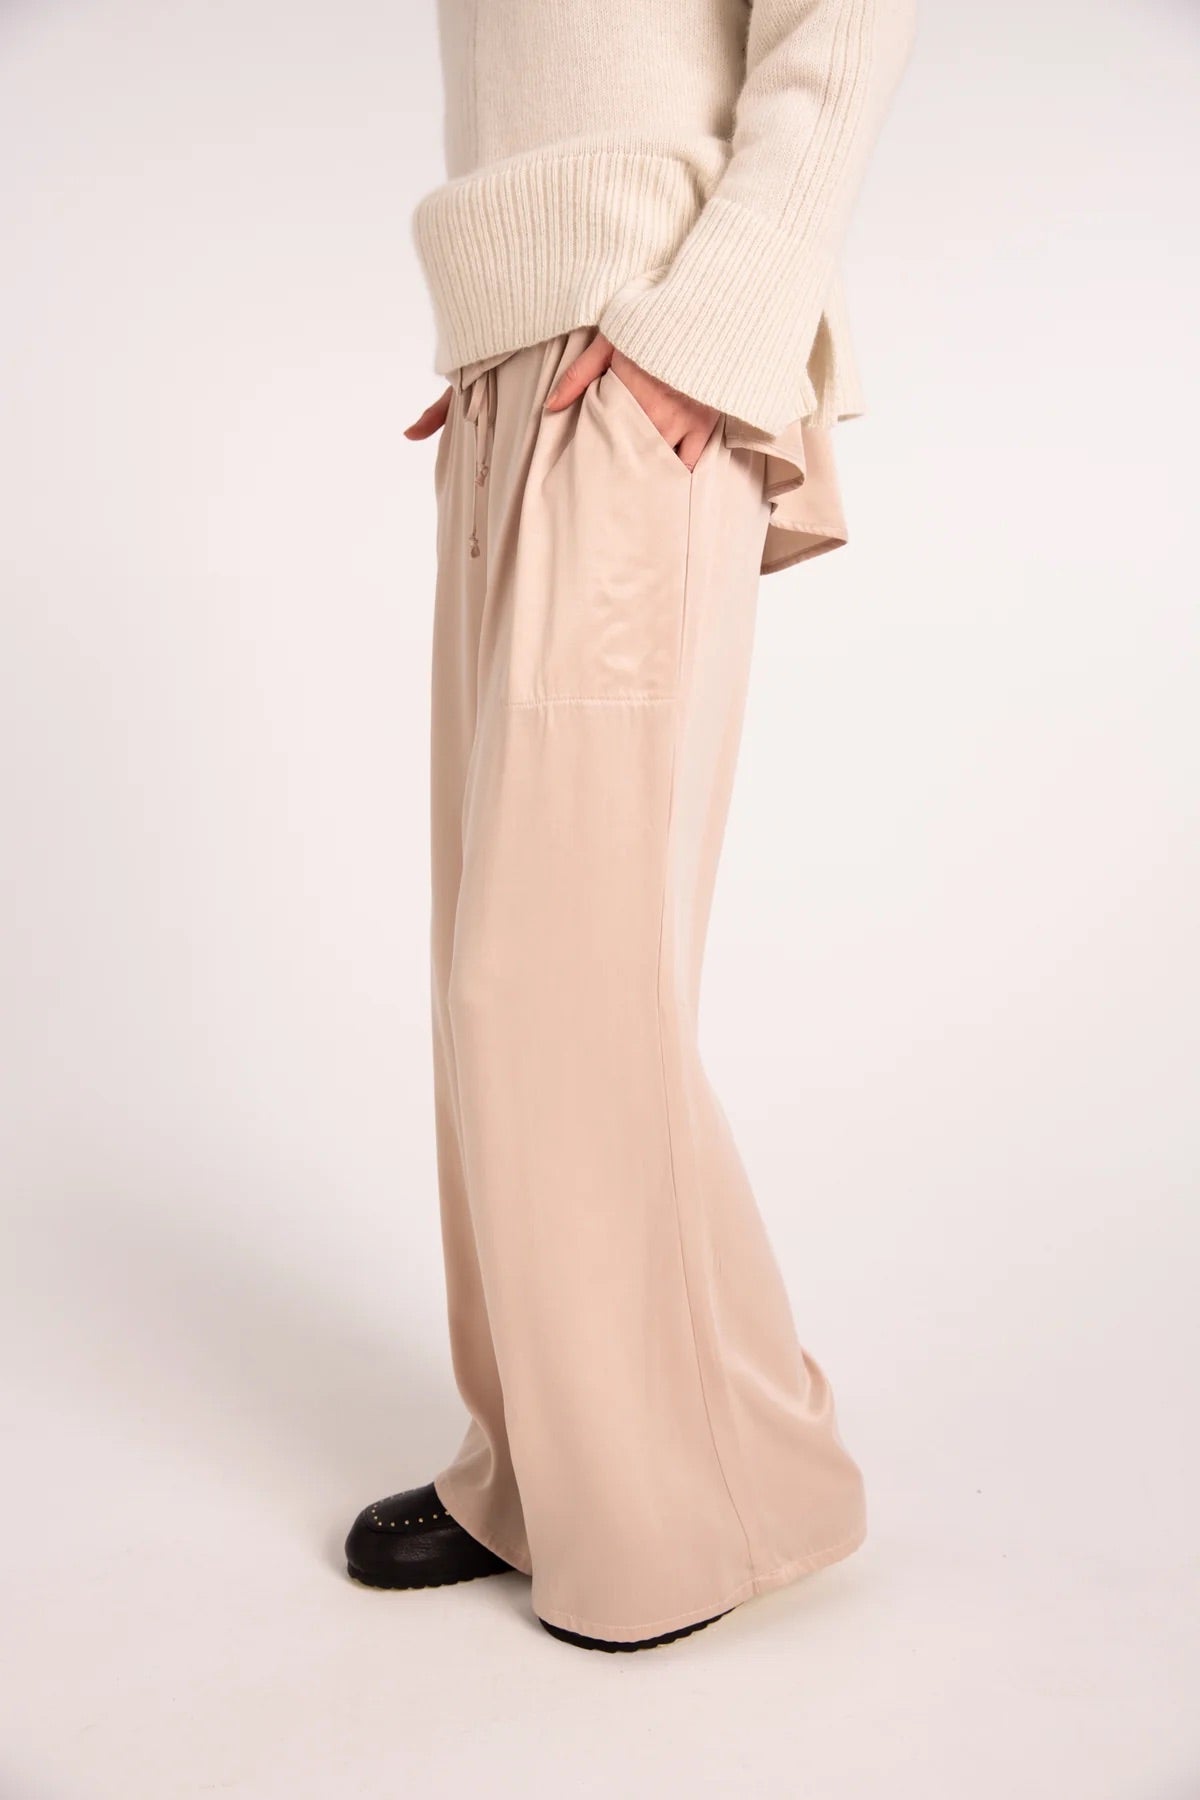 The Nyne Awakening Pant from Outline Clothing features here in an elegant sand washed oyster satin.